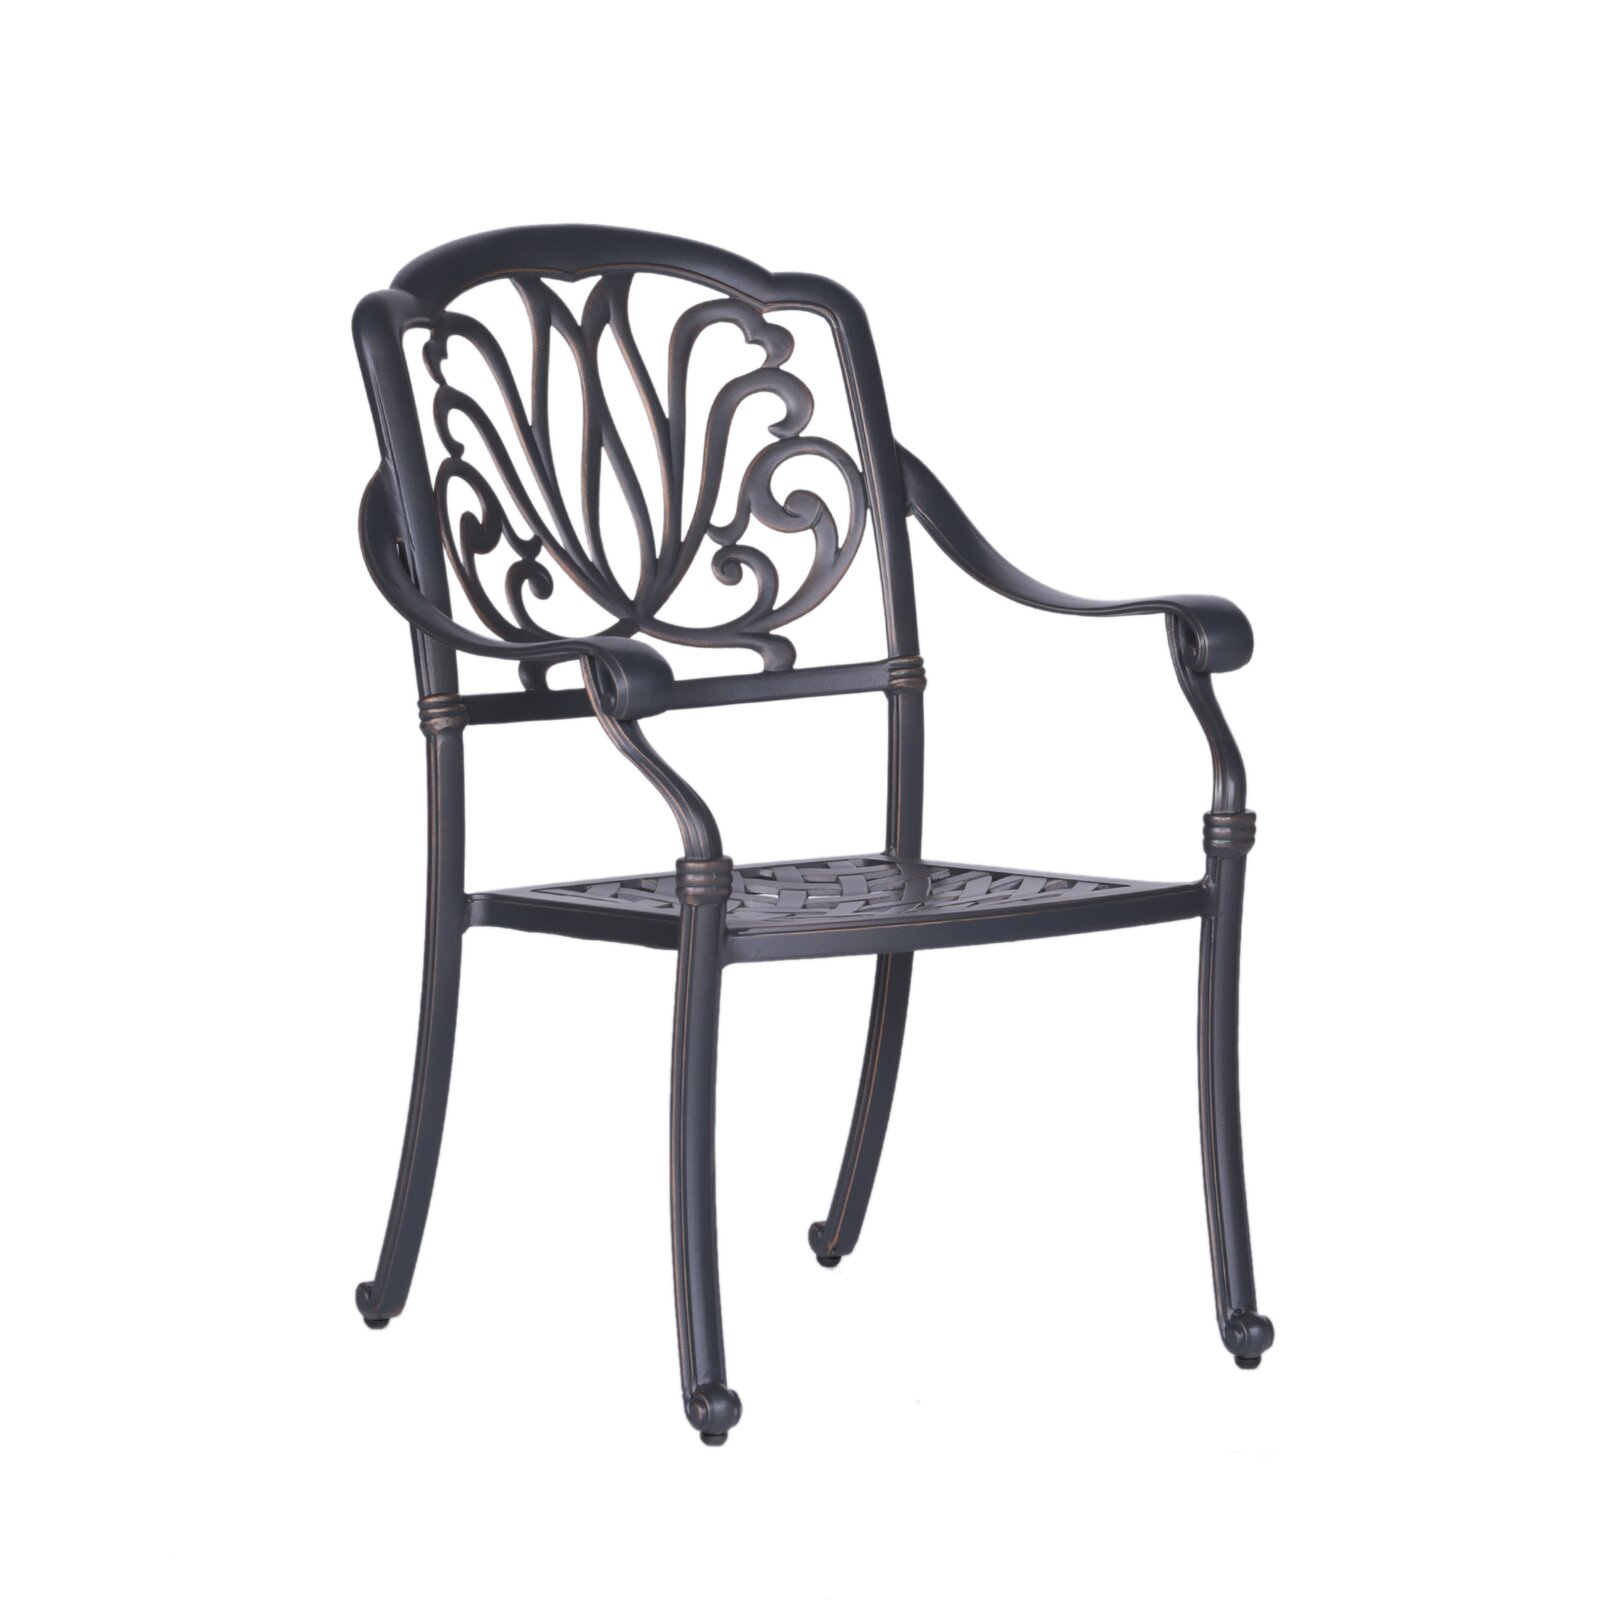 Kilmer Patio Dining Chair with Cushion, Seat: 16" H, Stacking: Yes - image 3 of 4